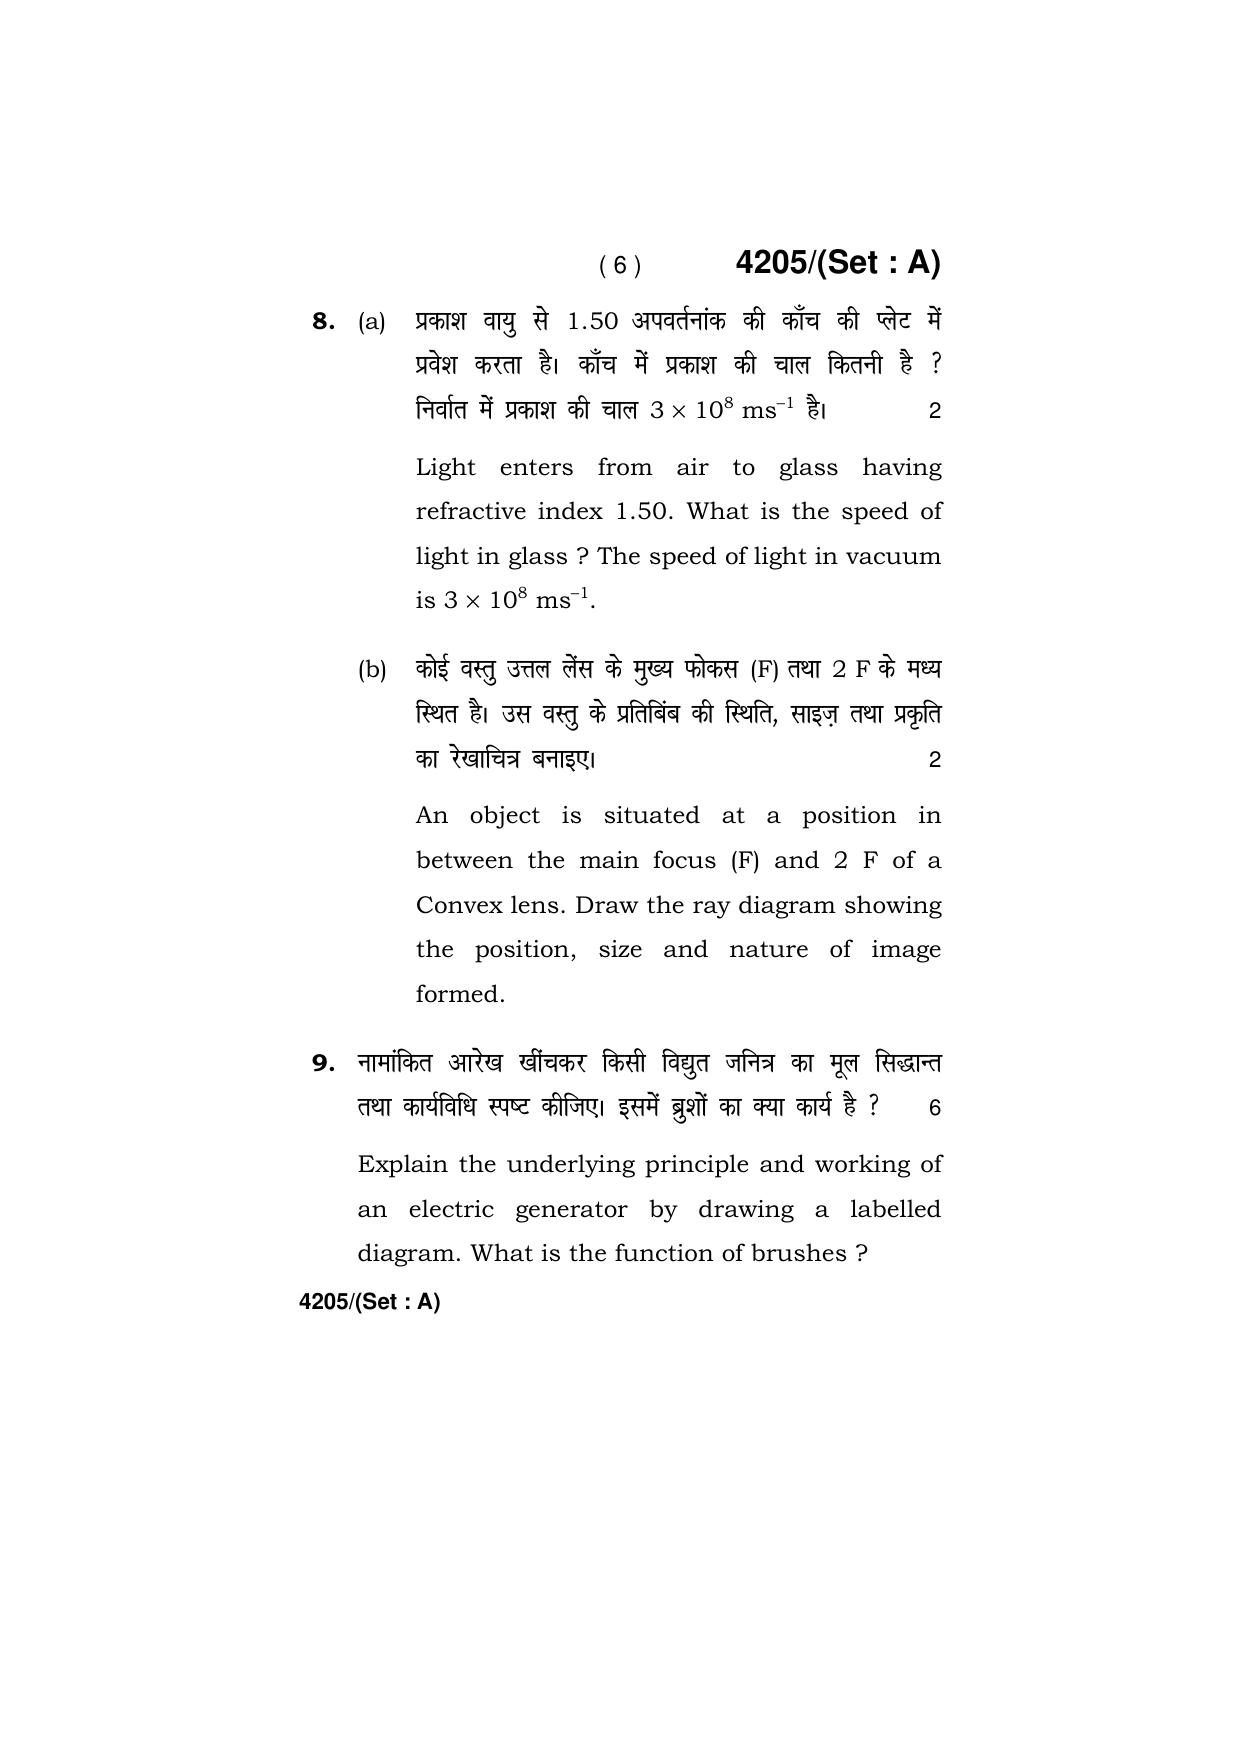 Haryana Board HBSE Class 10 Science (All Set) 2019 Question Paper - Page 6